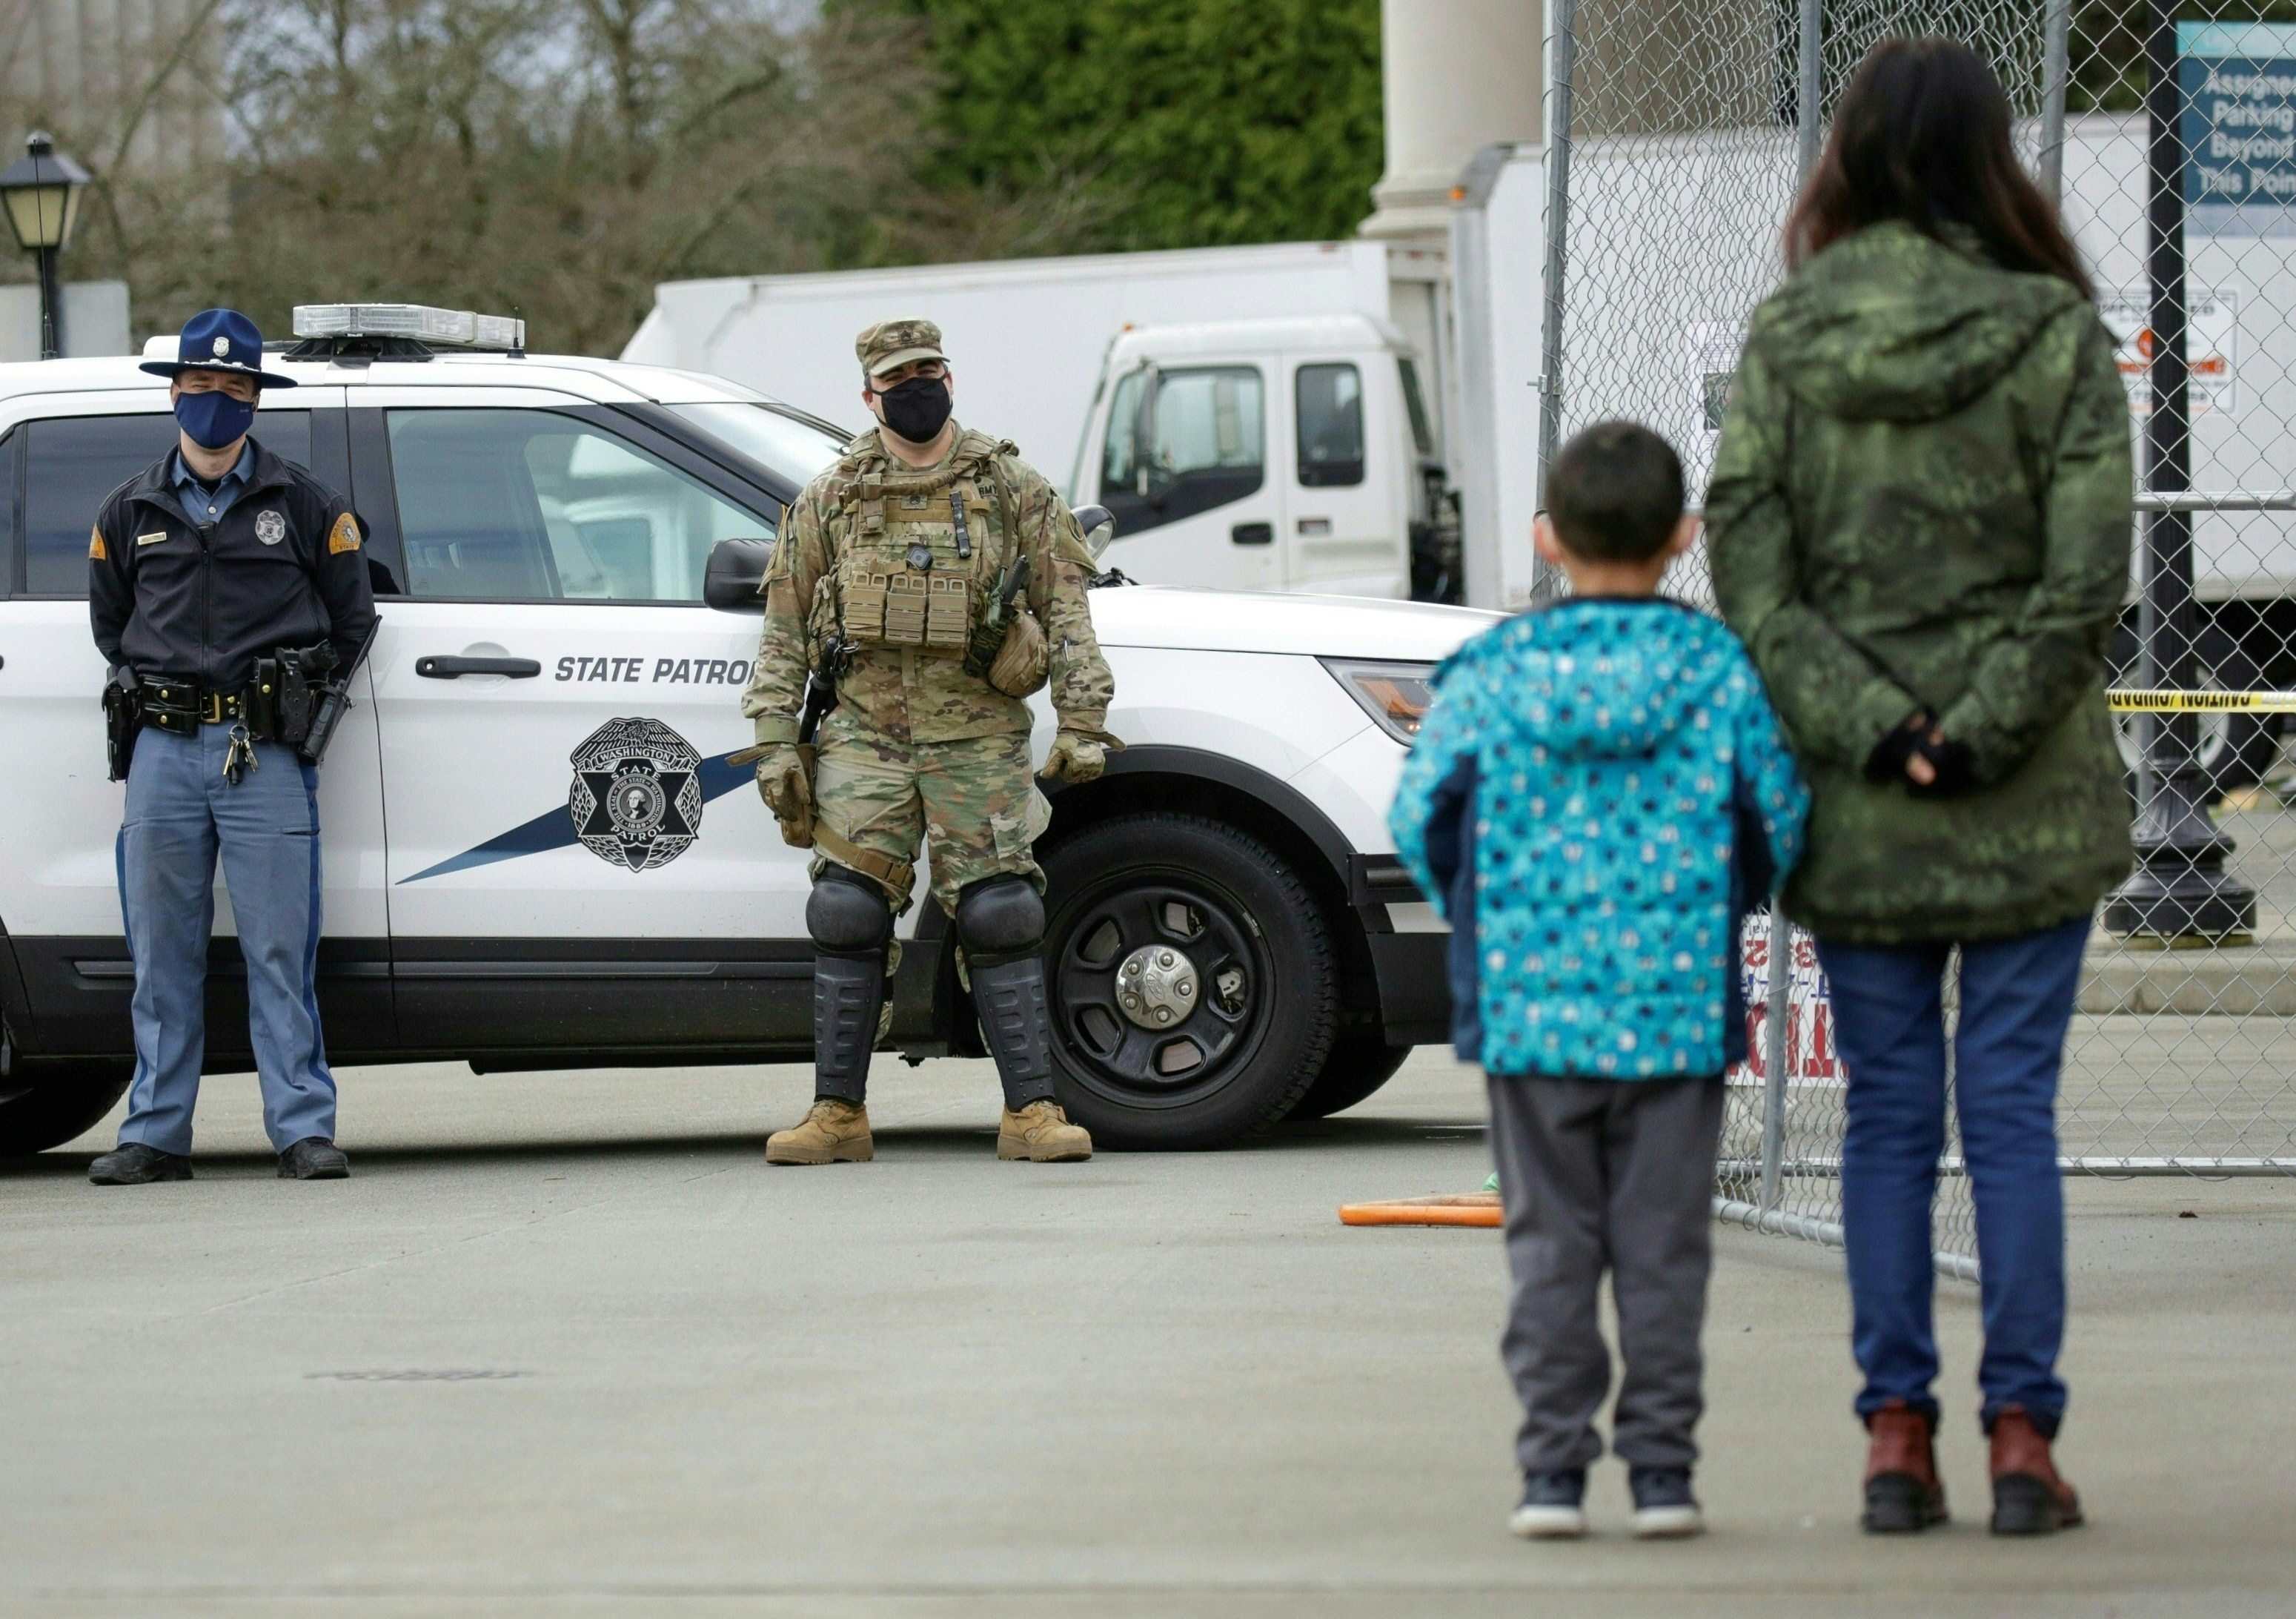 A woman and child look on as members of the Washington National Guard and State Police stand outside the state Capitol in Olympia, Washington on January 17